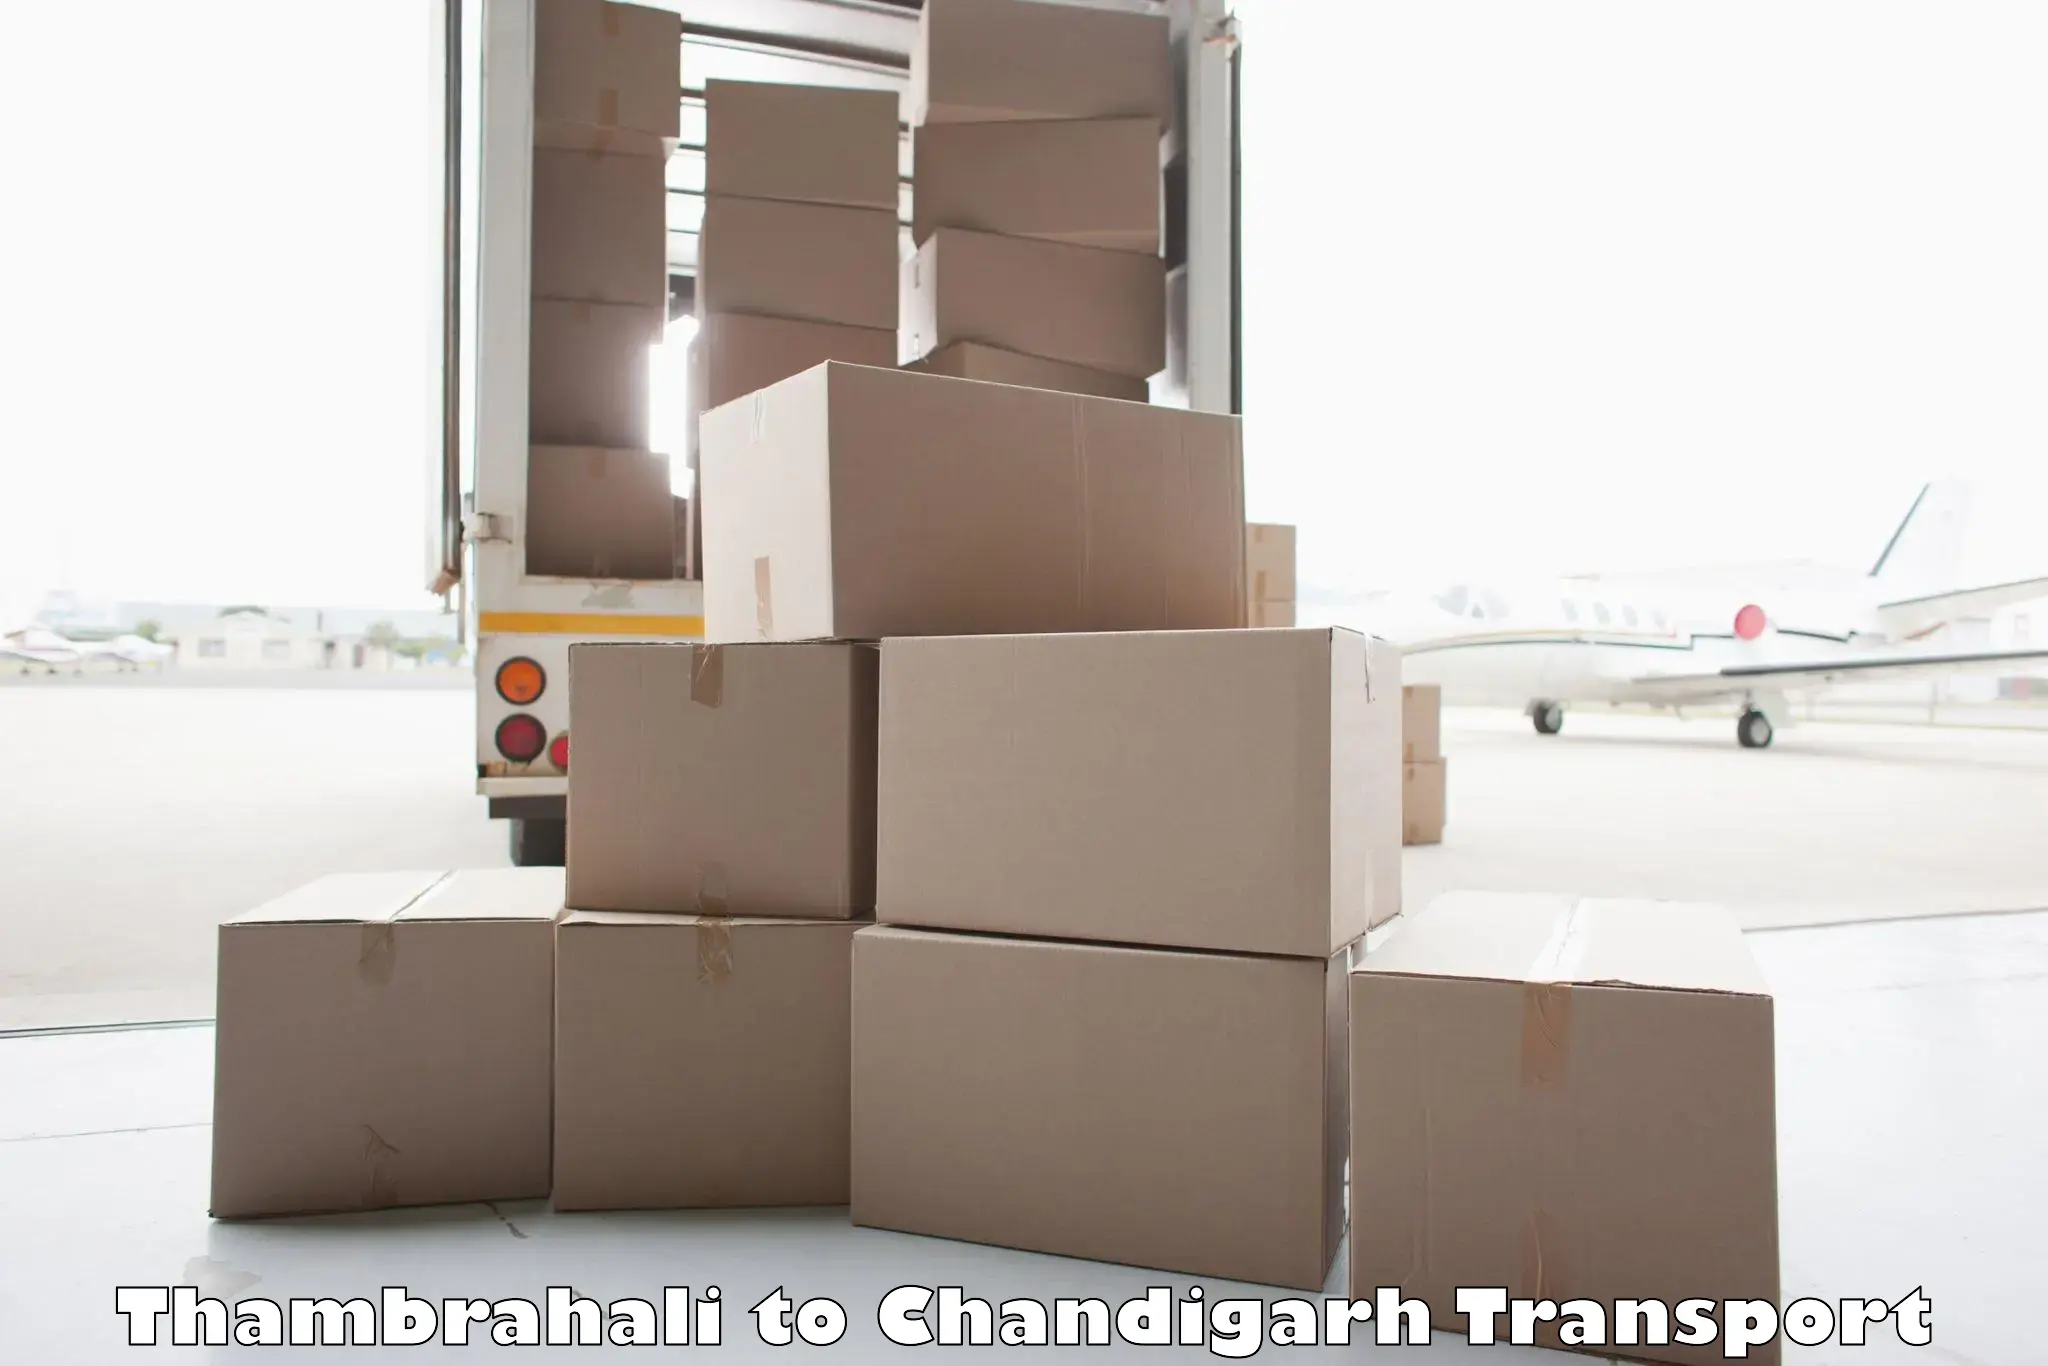 Delivery service Thambrahali to Chandigarh